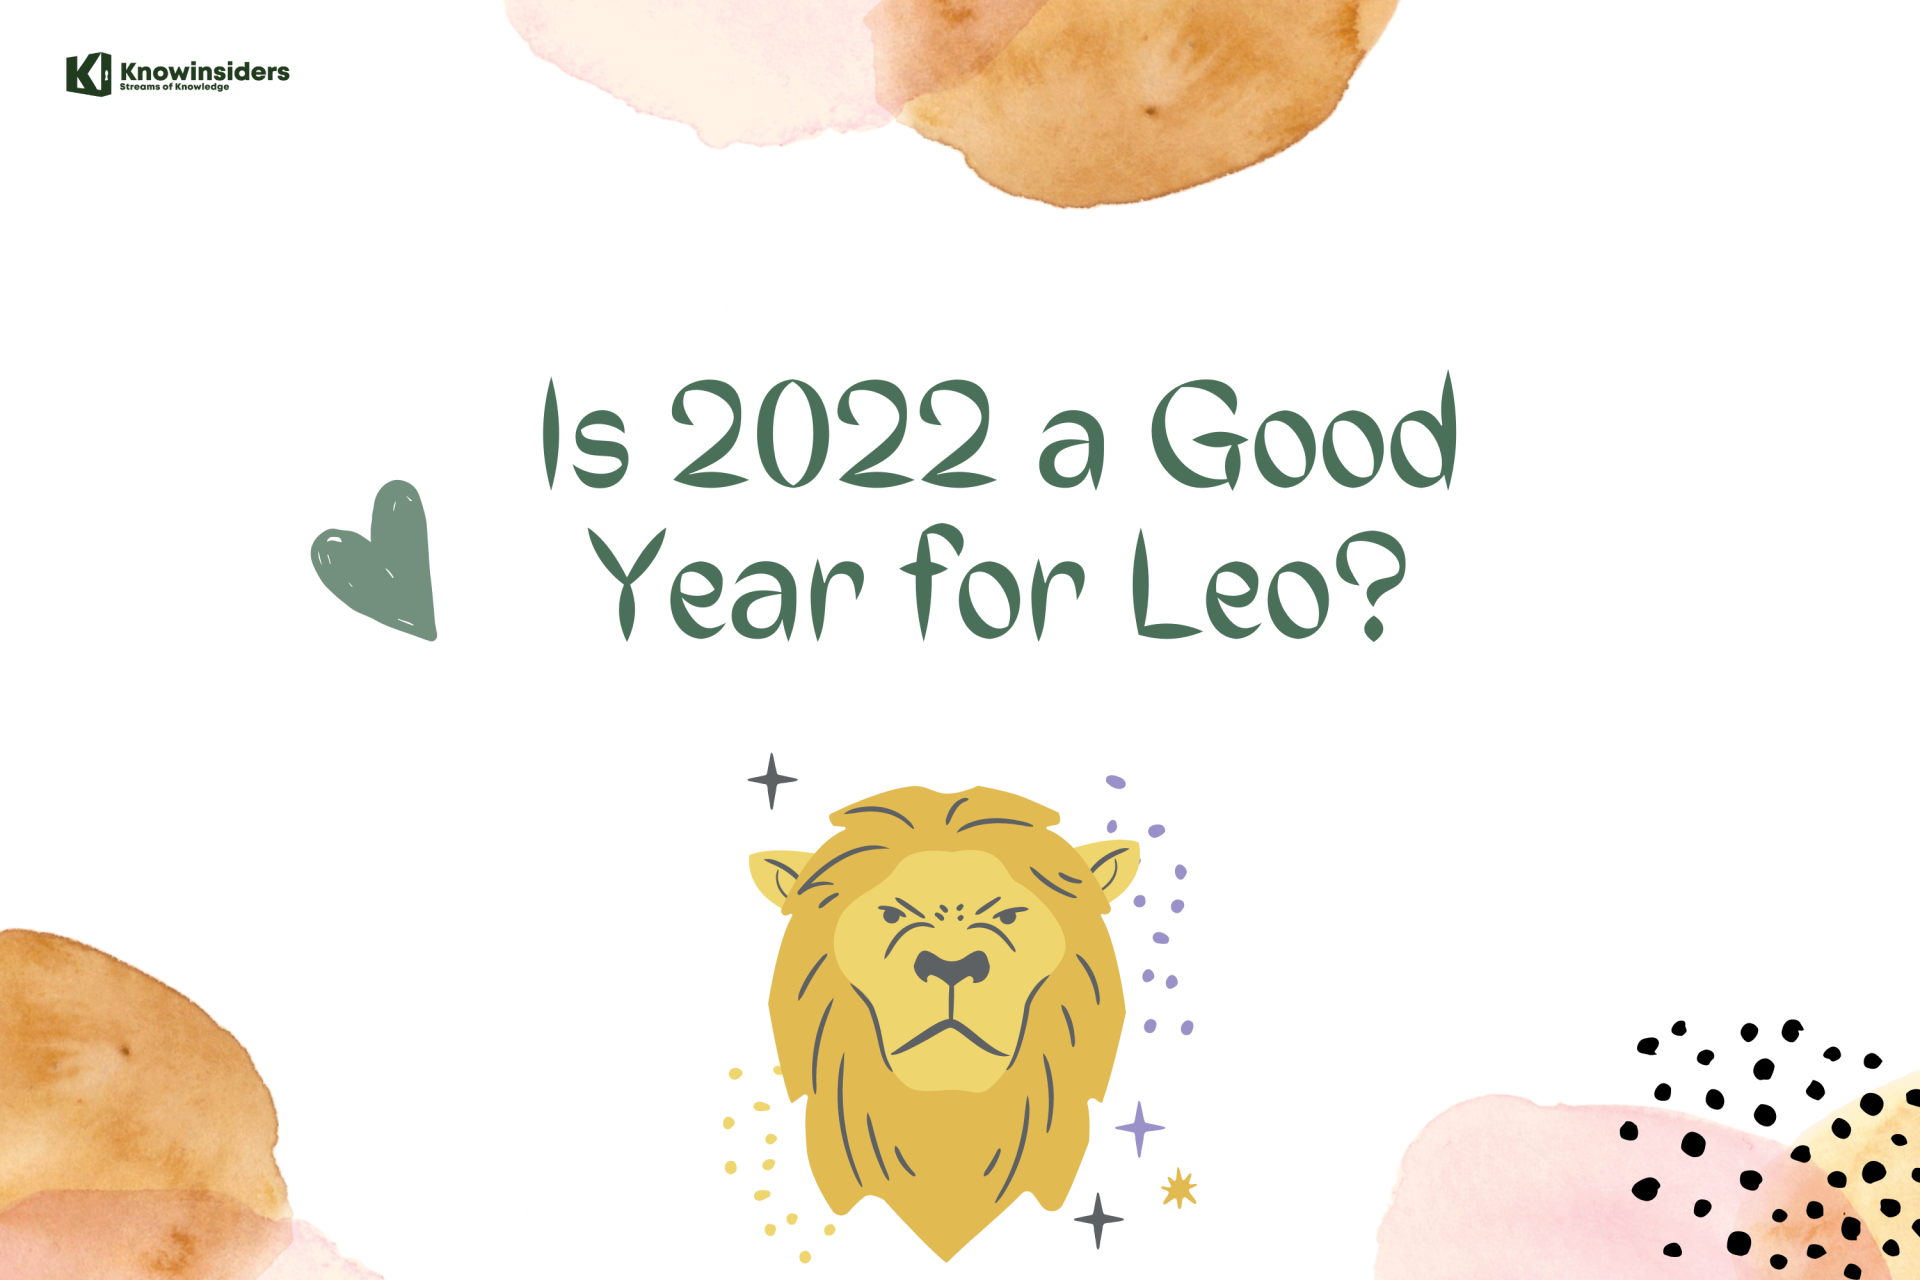 Is 2022 a Good Year for Leo?